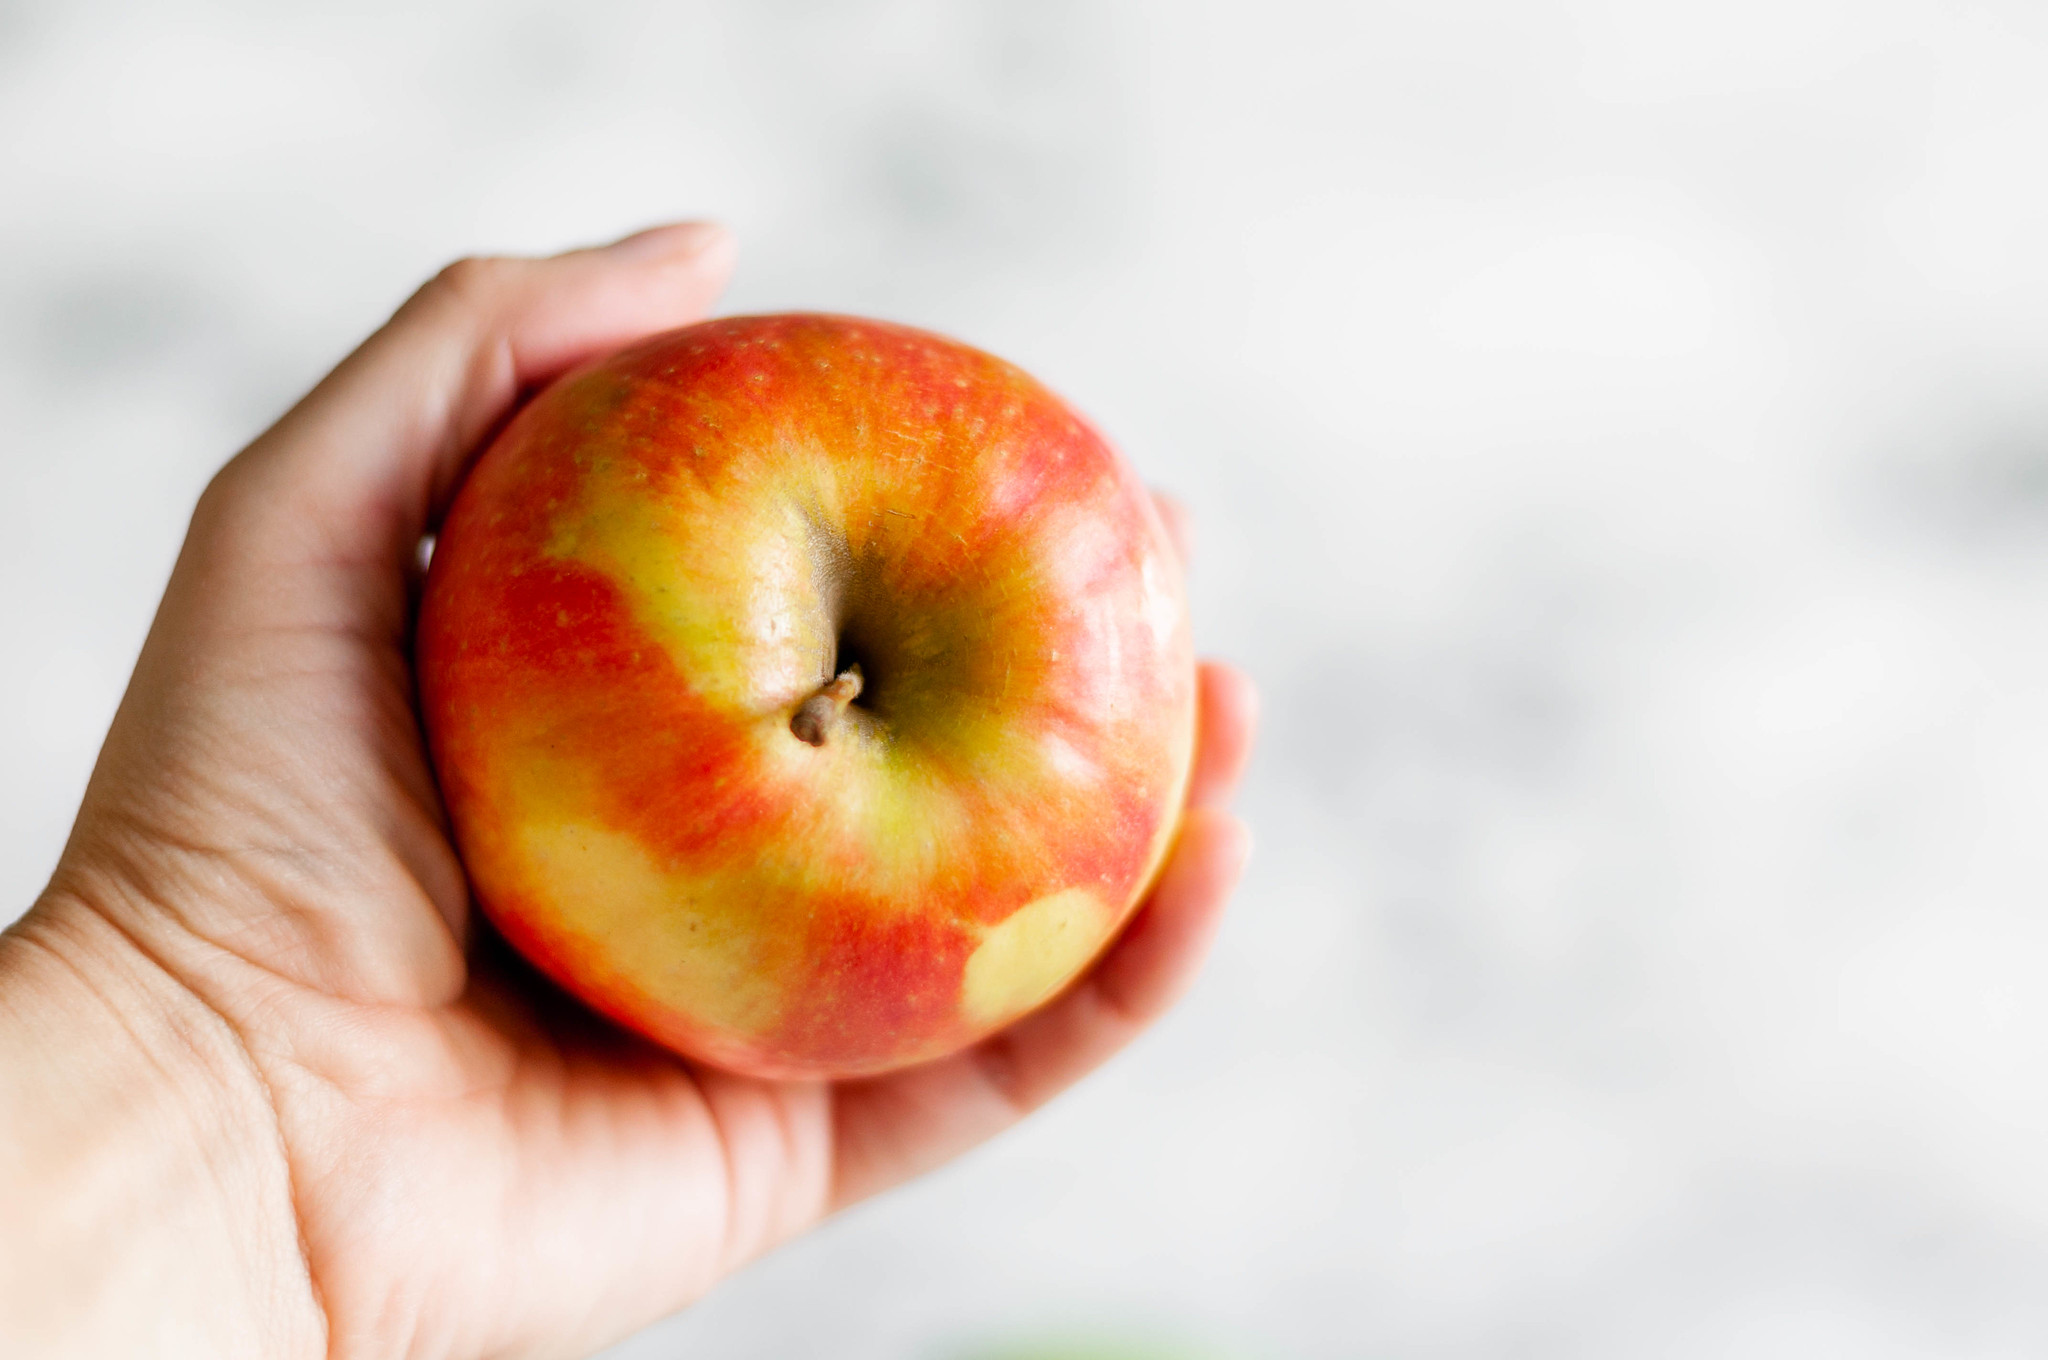 Today I'm sharing a guide to the best apples for baking. My 5 favorites for apples pies, crisps and more are included. Honeycrisp, Granny Smith, Jonagold, Braeburn and Pink Lady all made the cut.